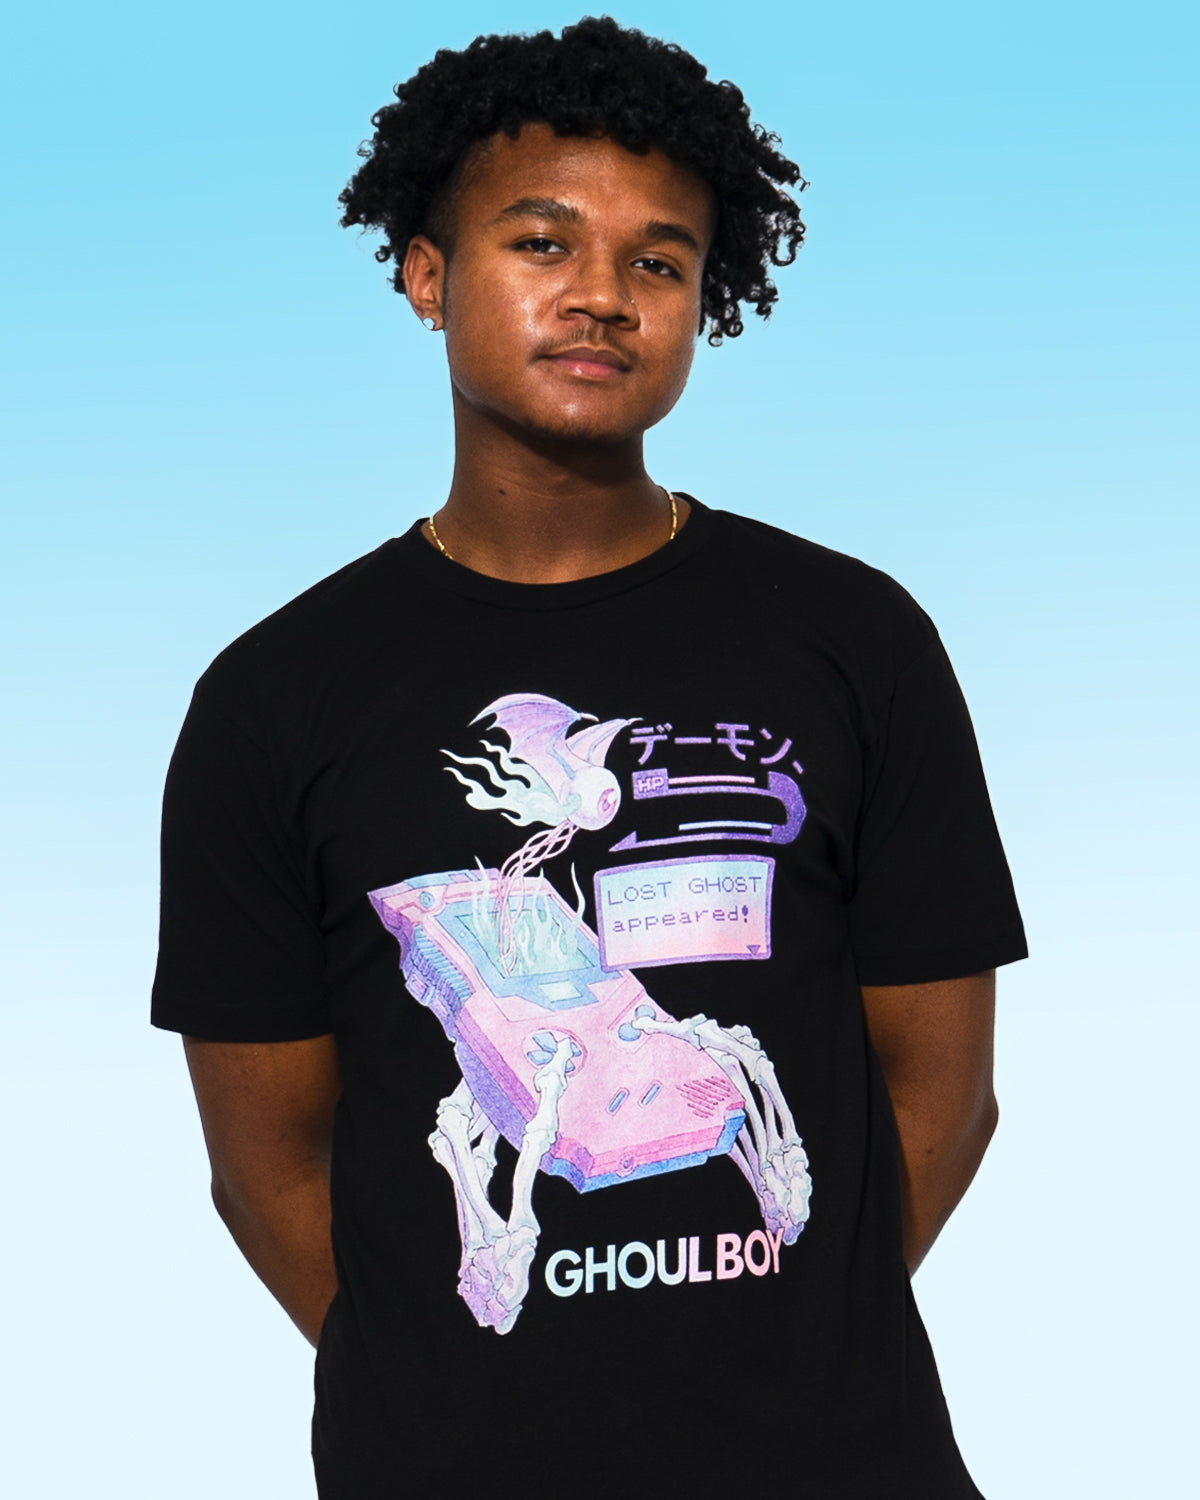 Experience Aesthetic and Vaporwave fashion with Vapor95's Graphic